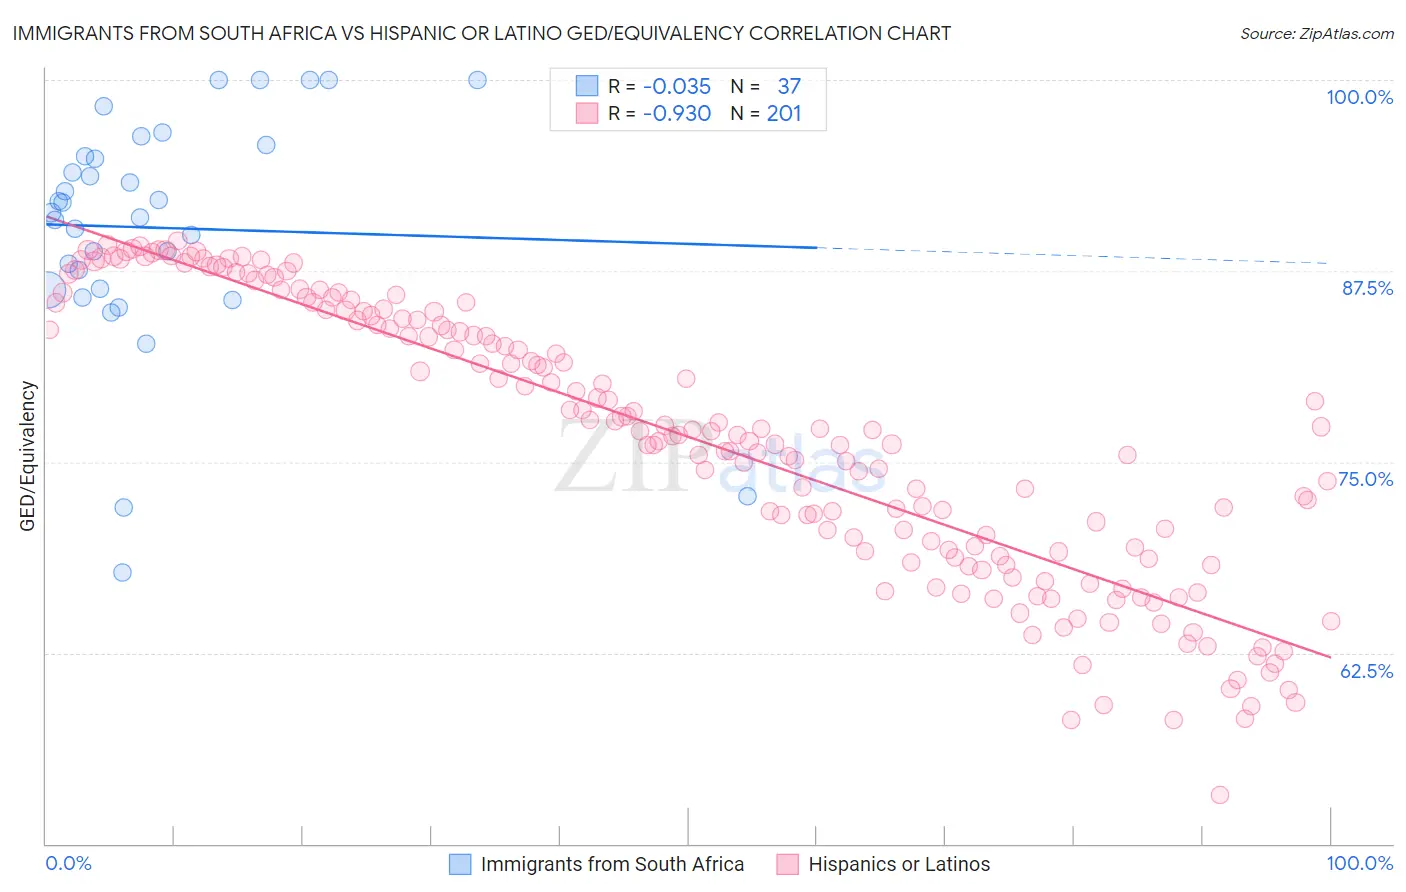 Immigrants from South Africa vs Hispanic or Latino GED/Equivalency